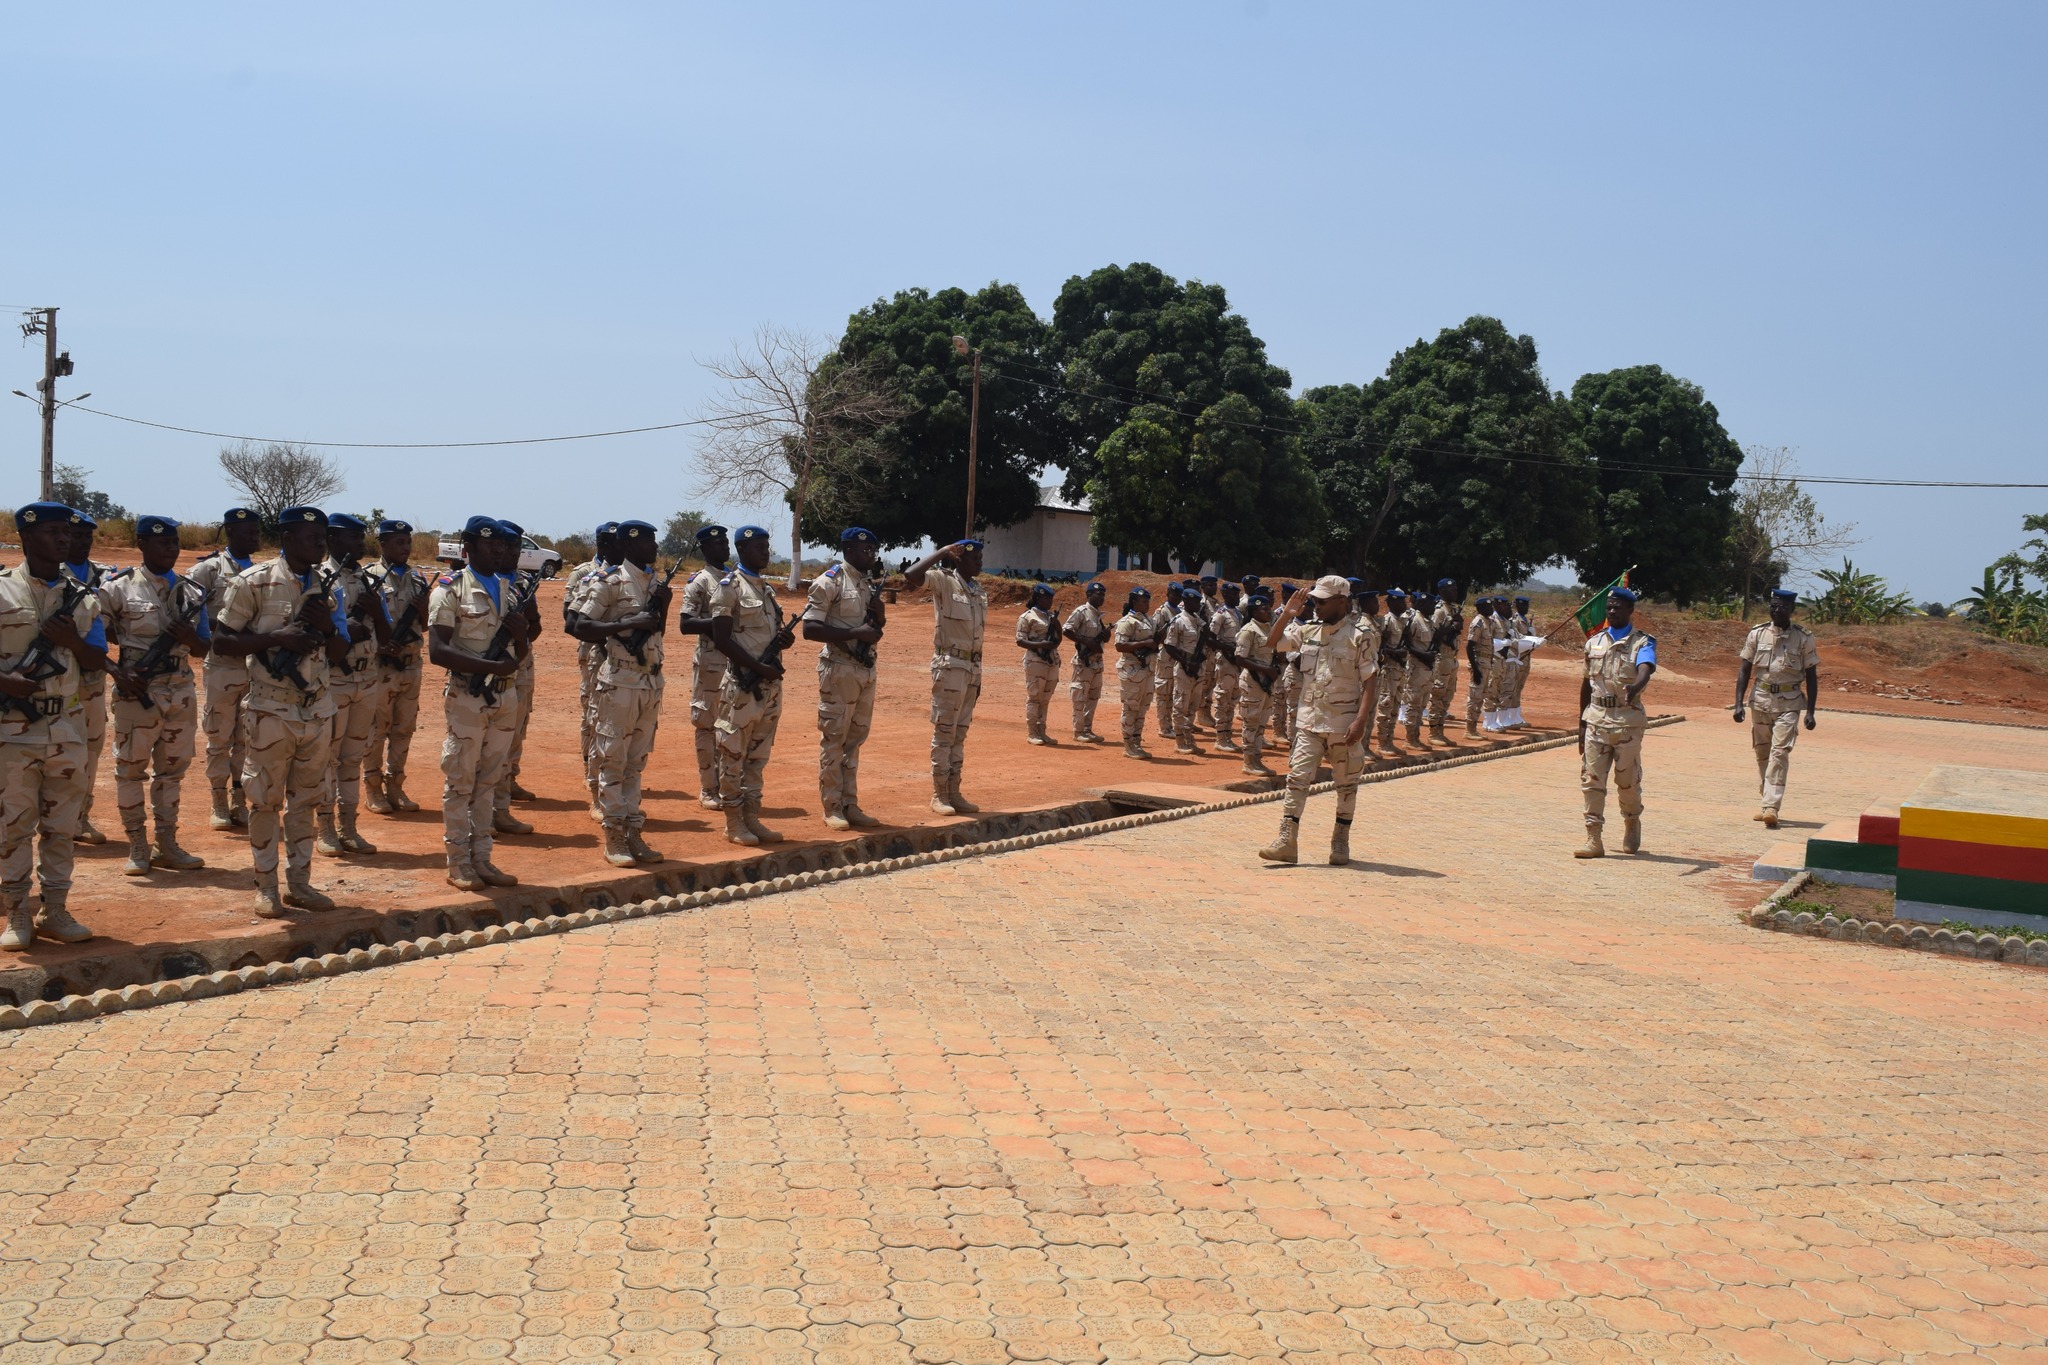 Wearing of stripes ceremony for the second quarter of the current financial year in the courtyard of Ngaoundéré Air Base 302.